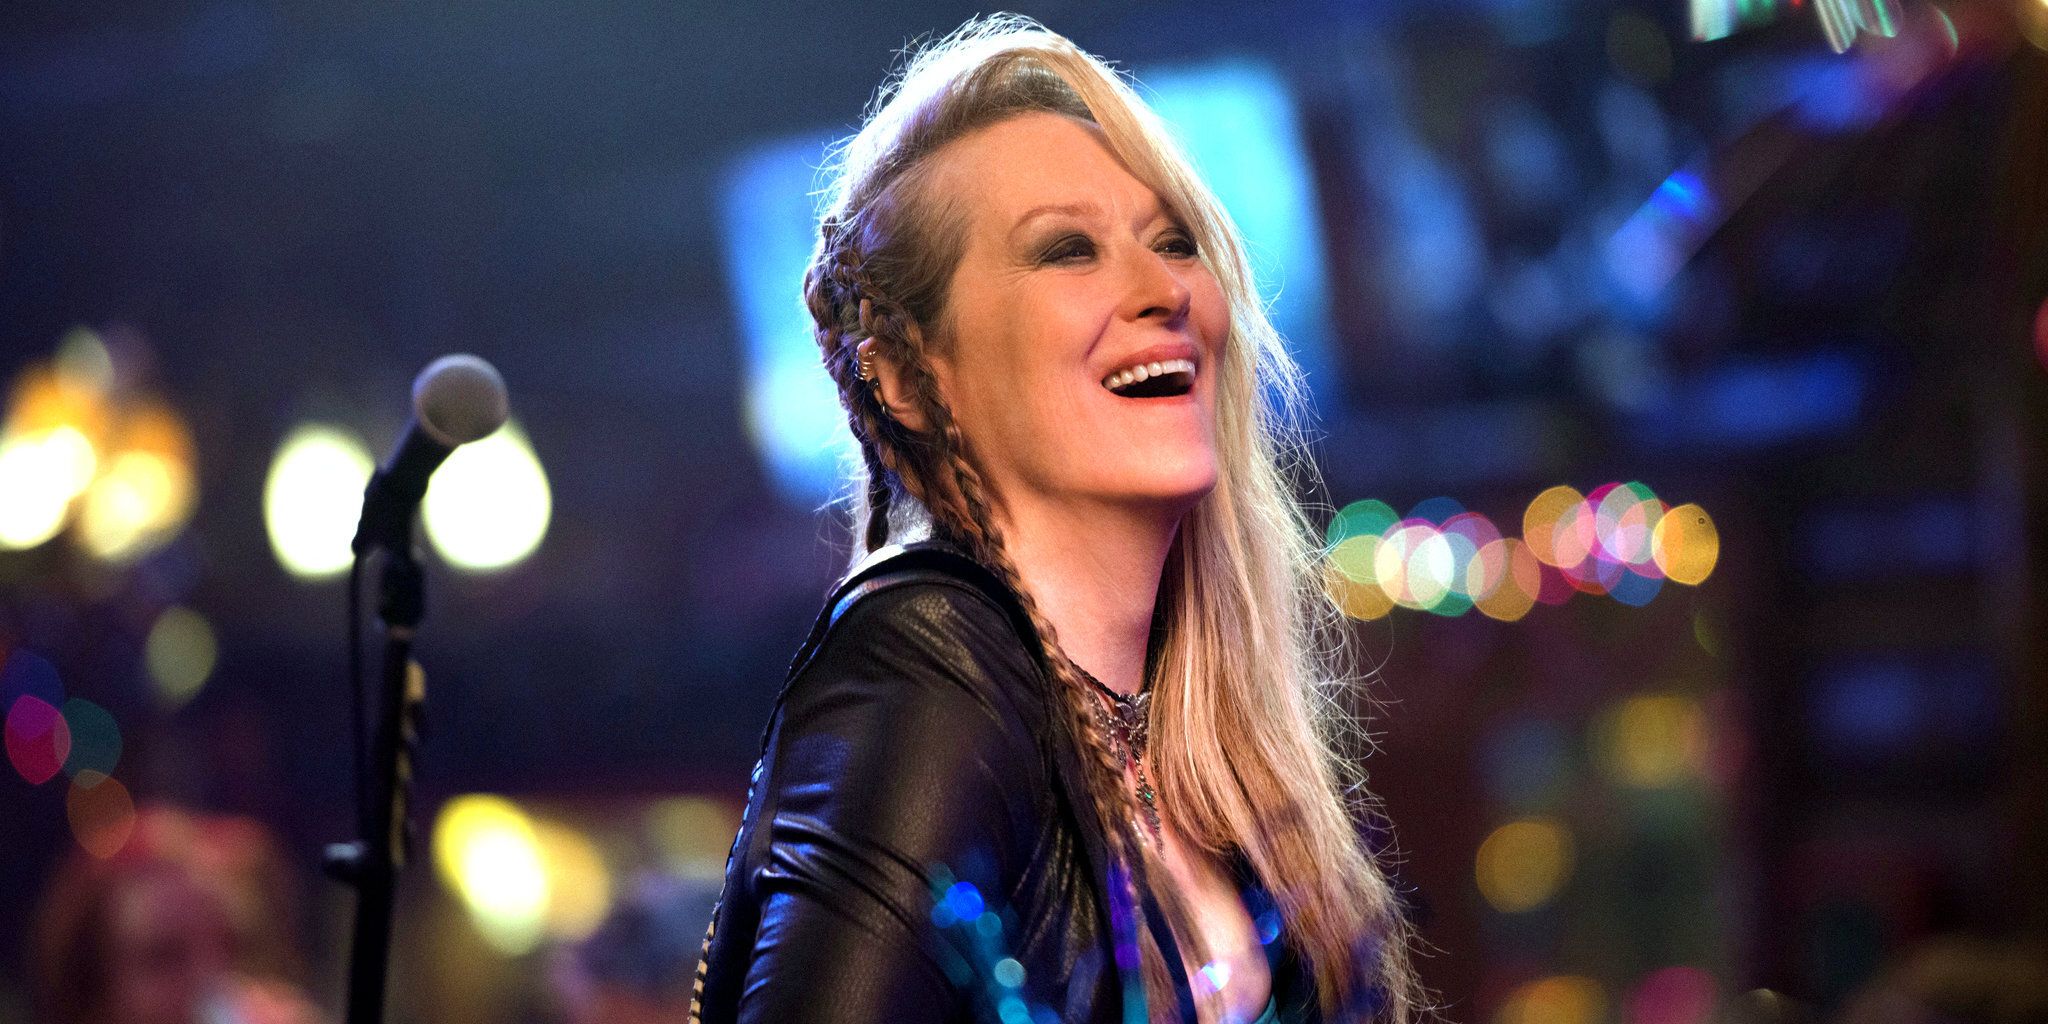 A still featuring Meryl Streep as Ricki in Ricki and the Flash, up on stage performing a rock and roll song